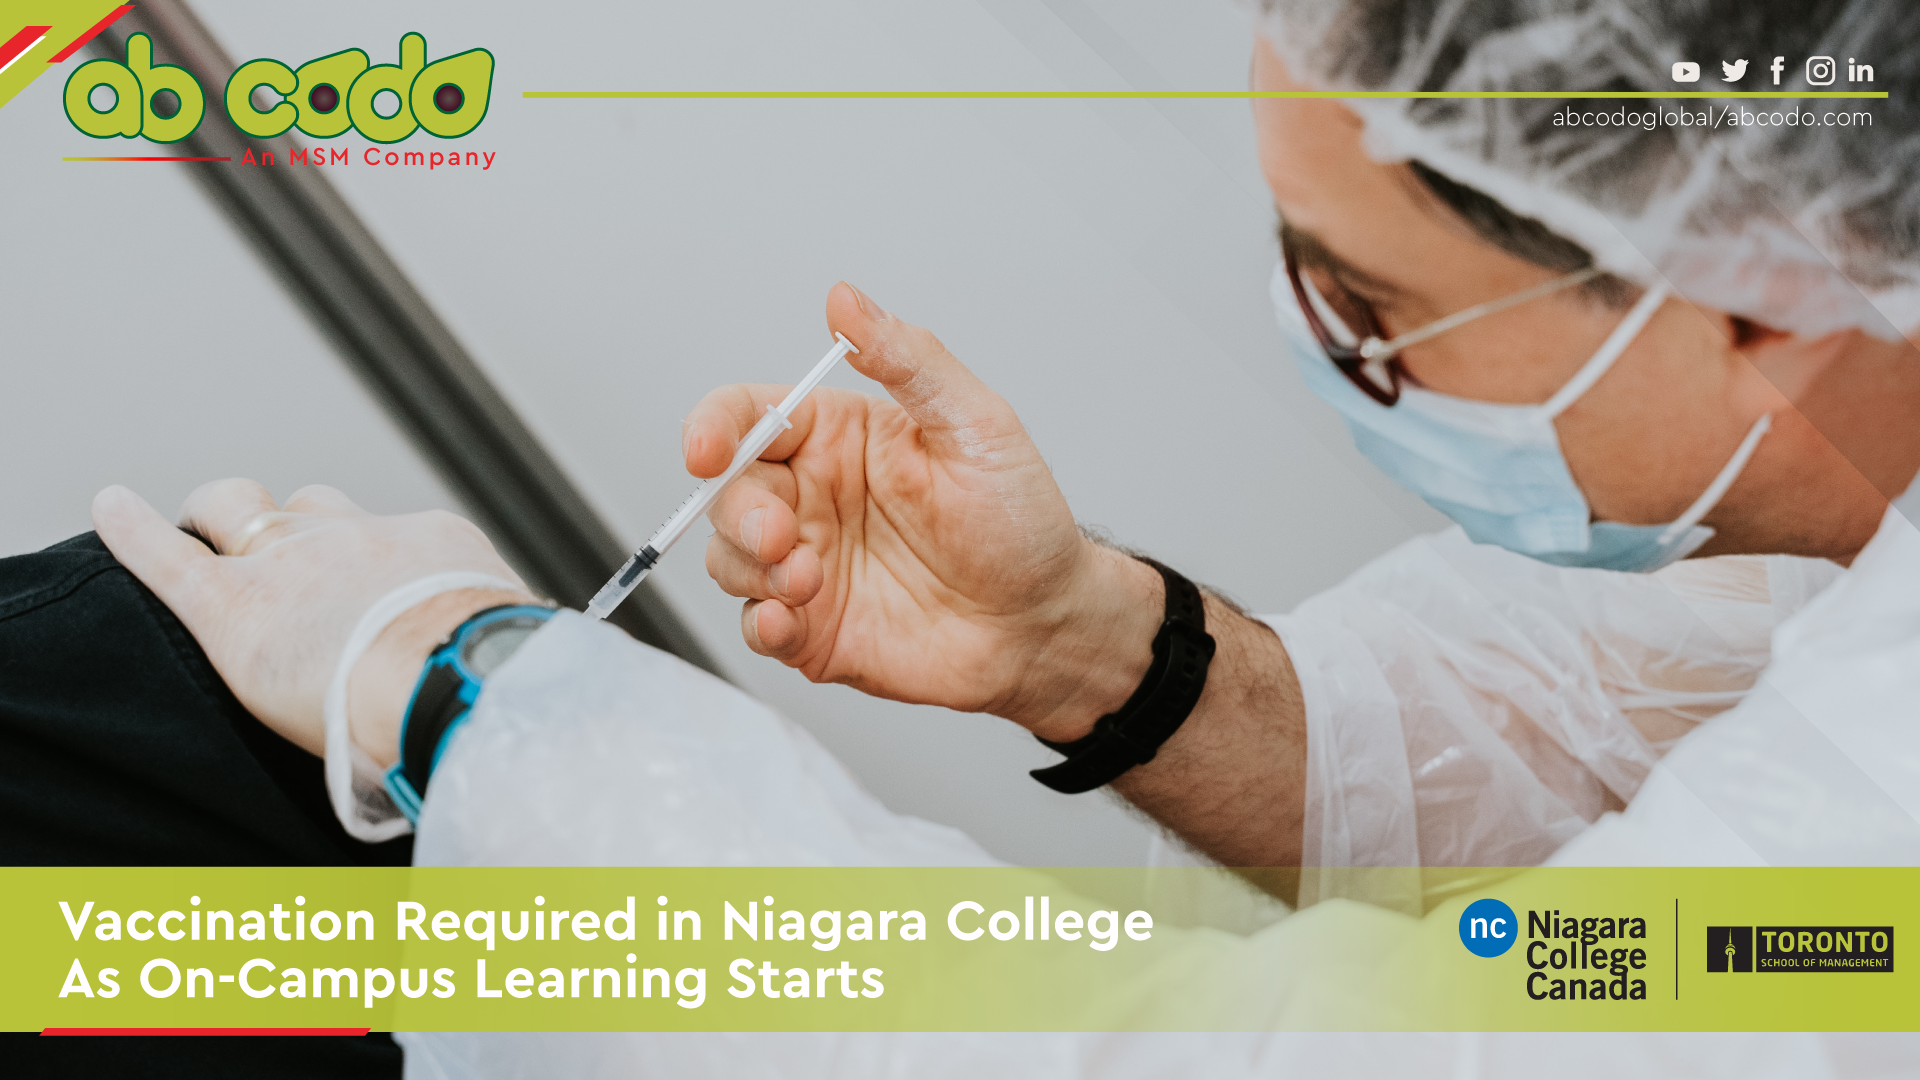 Vaccination Required in Niagara College As On-Campus Learning Starts